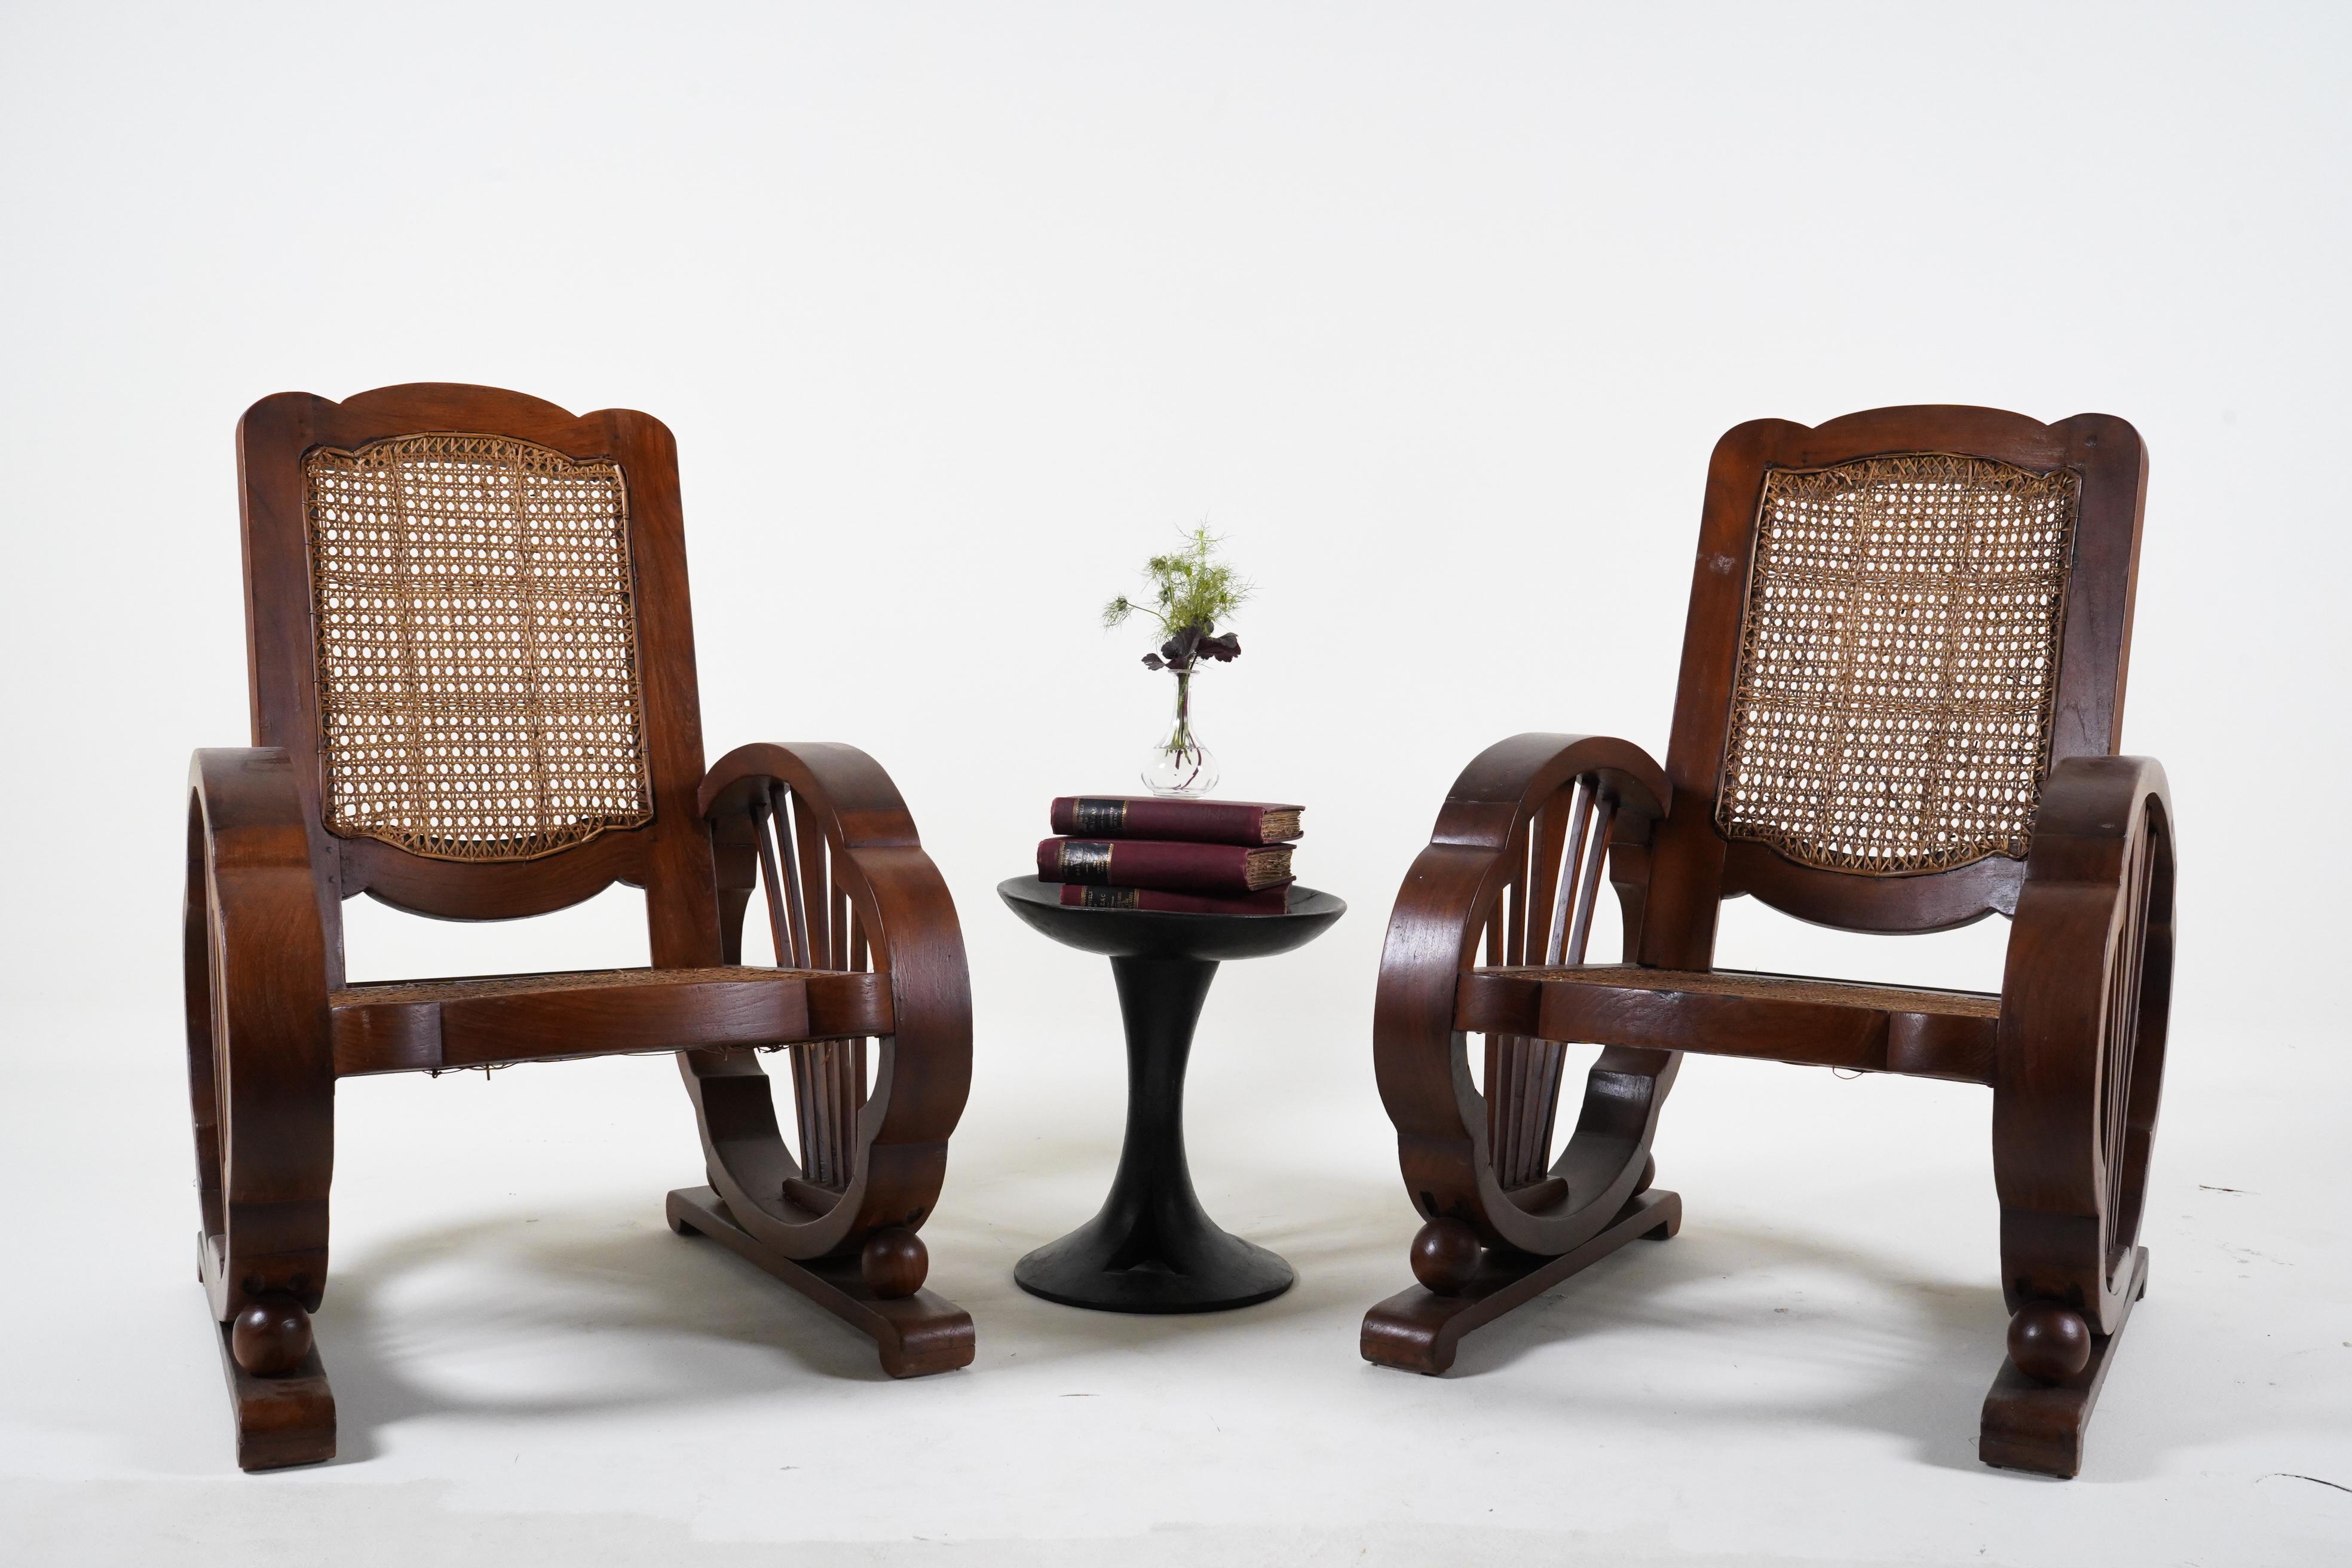 These stylish lounge chairs date to the 1920's and were made in Rangoon, Burma. During the British Colonial period, much Indian furniture was made following British or European styles. High quality native hardwood was used, such as Teak and Rosewood